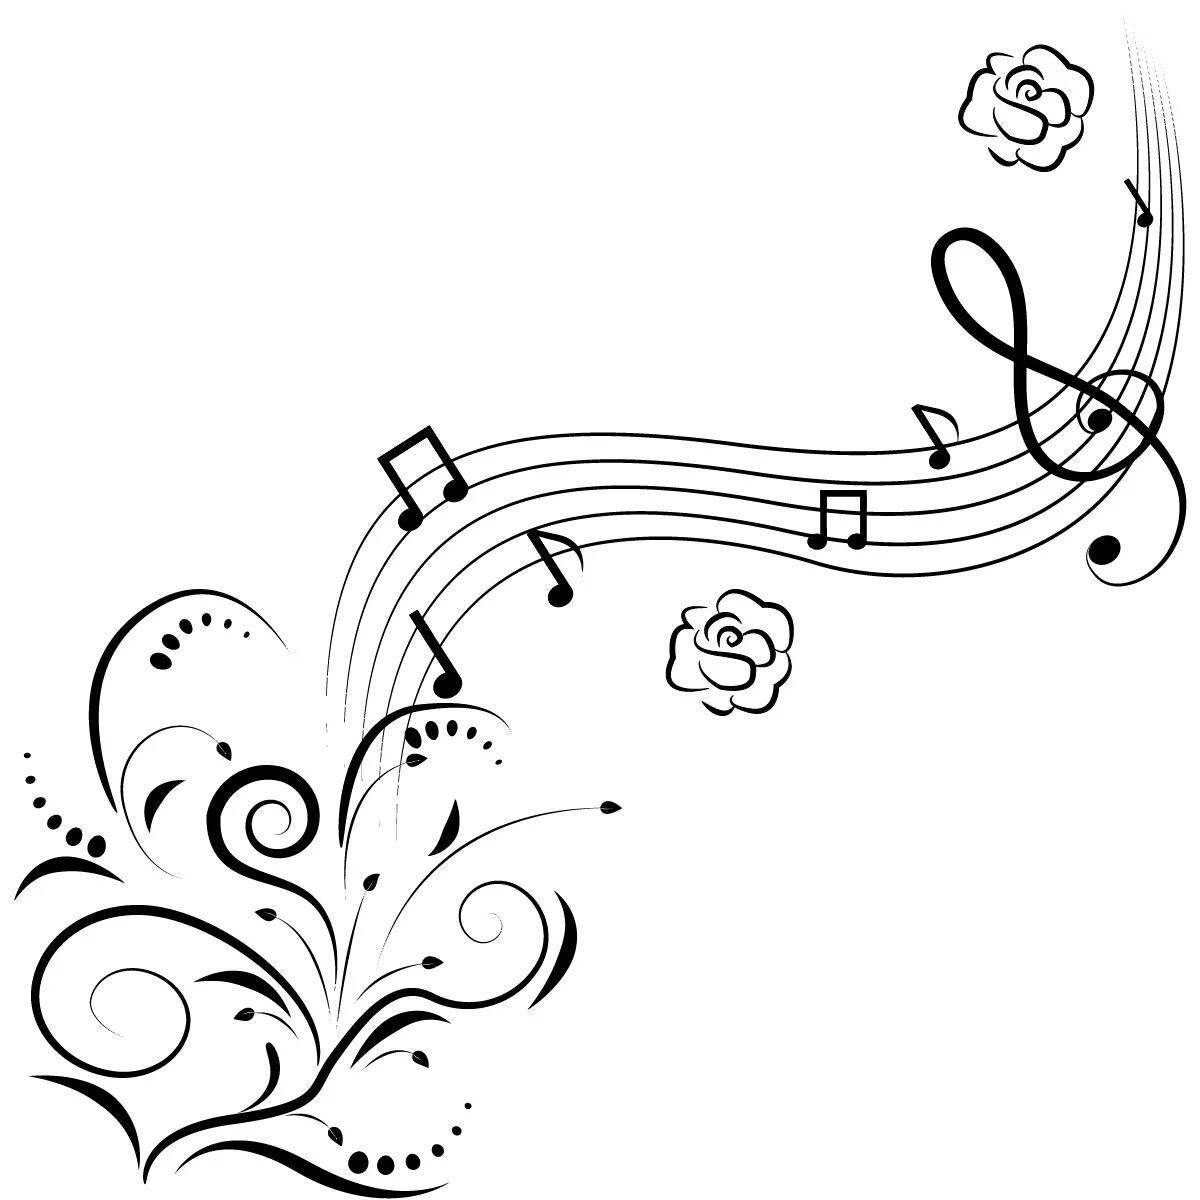 Animated music note coloring page